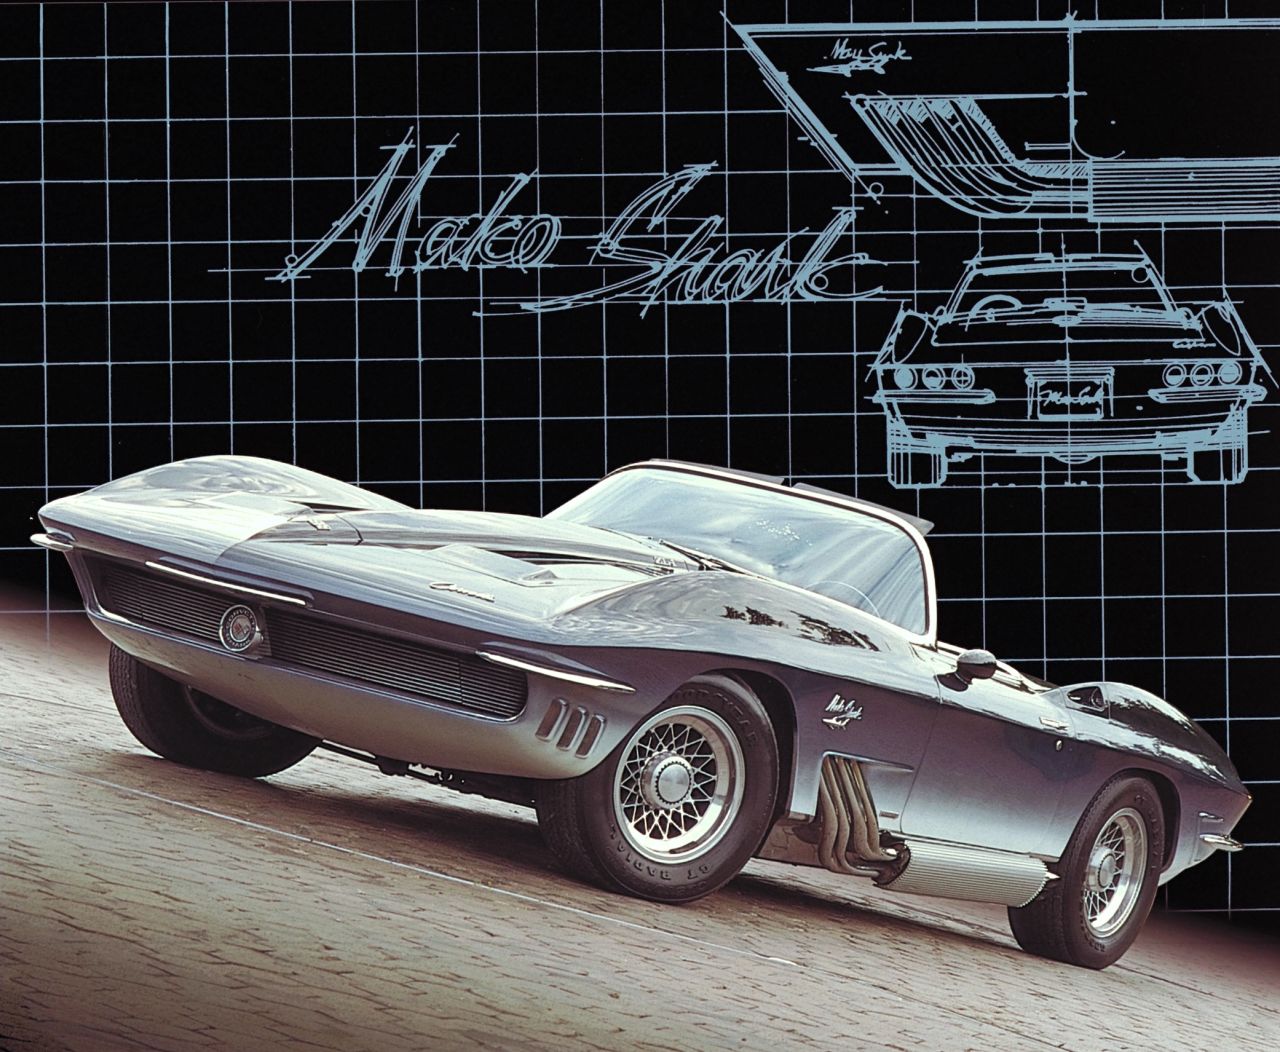 Retro, sci-fi, and inspired by a shark caught by General Motors head Bill Mitchell. It's little wonder the Mako Shark Corvette has gained cult status among car enthusiasts. Here are some more of our top shark-inspired designs...